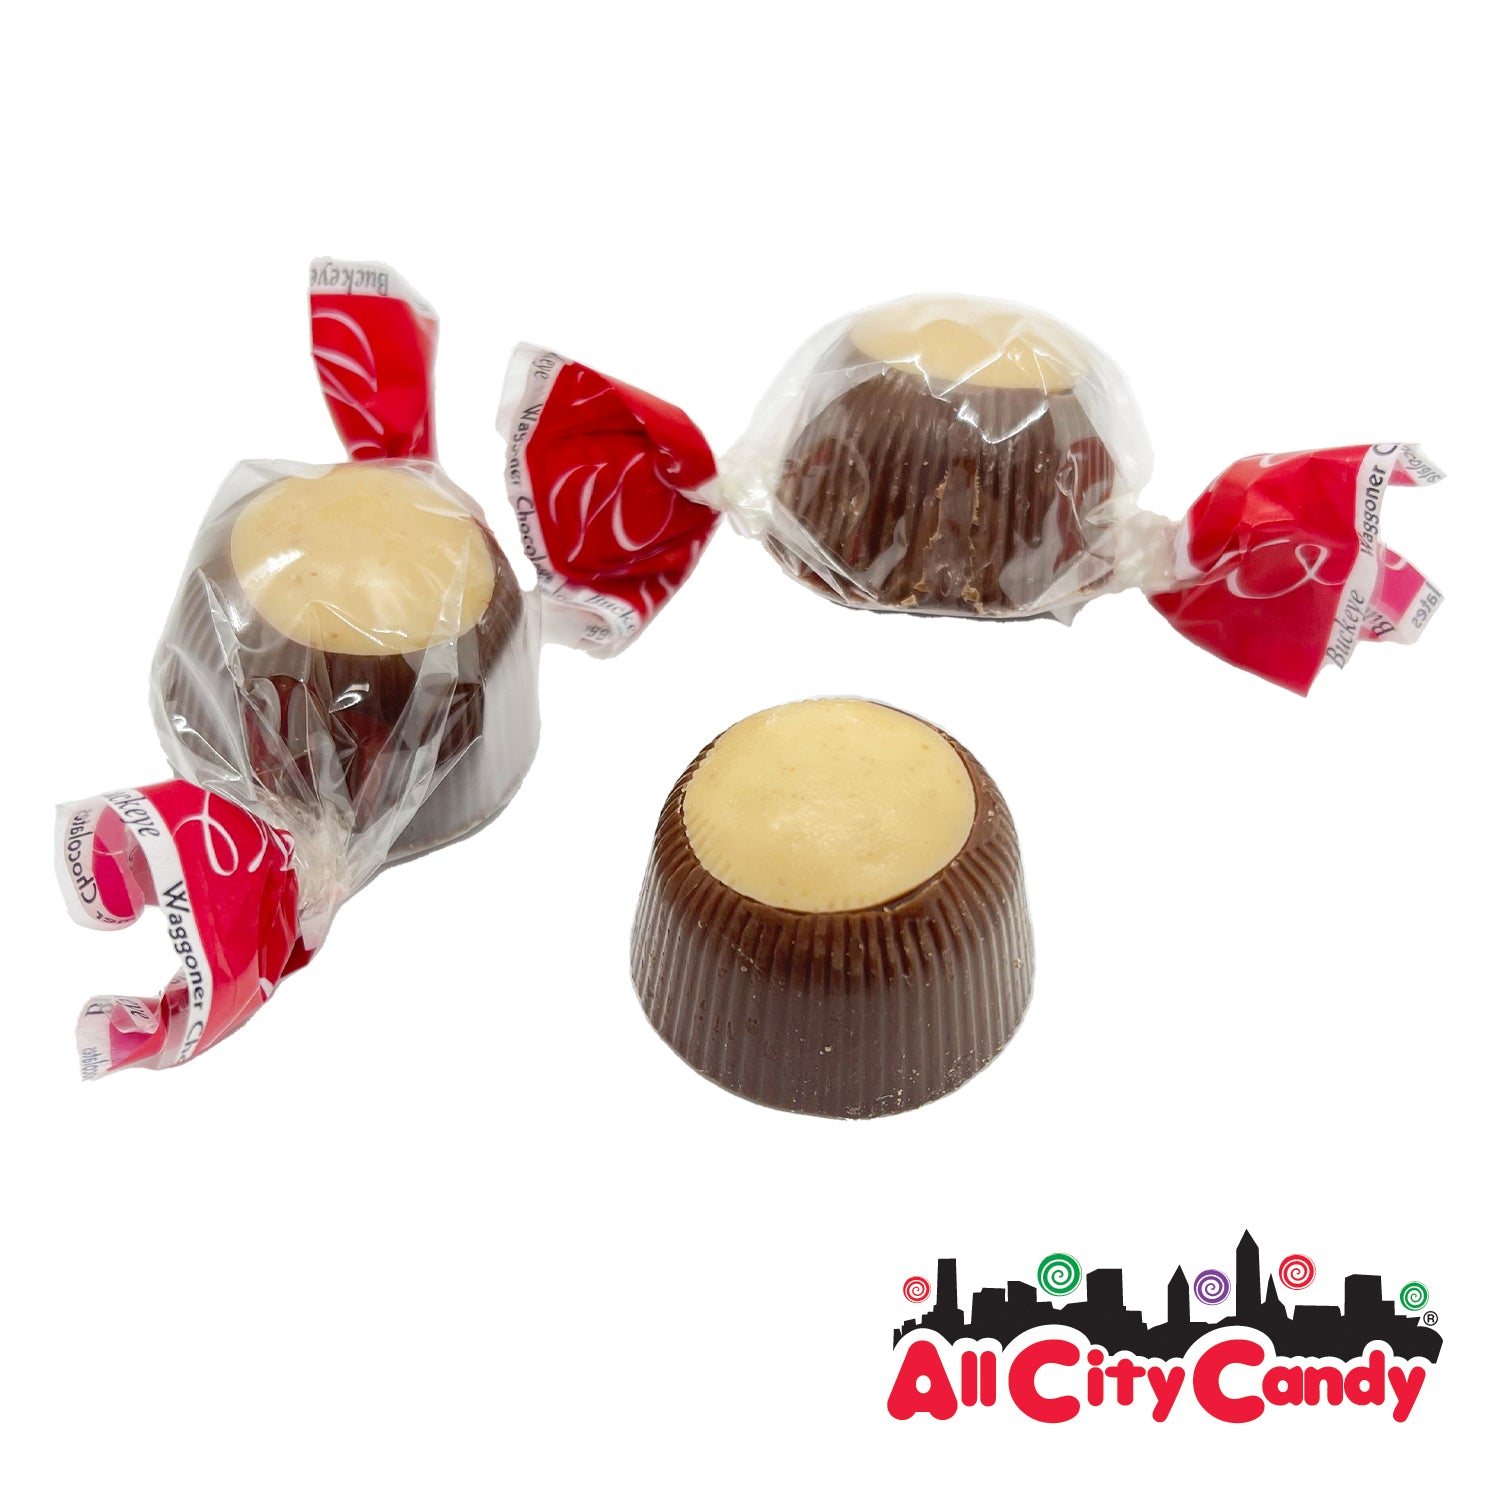 Christmas Candy - All City Candy